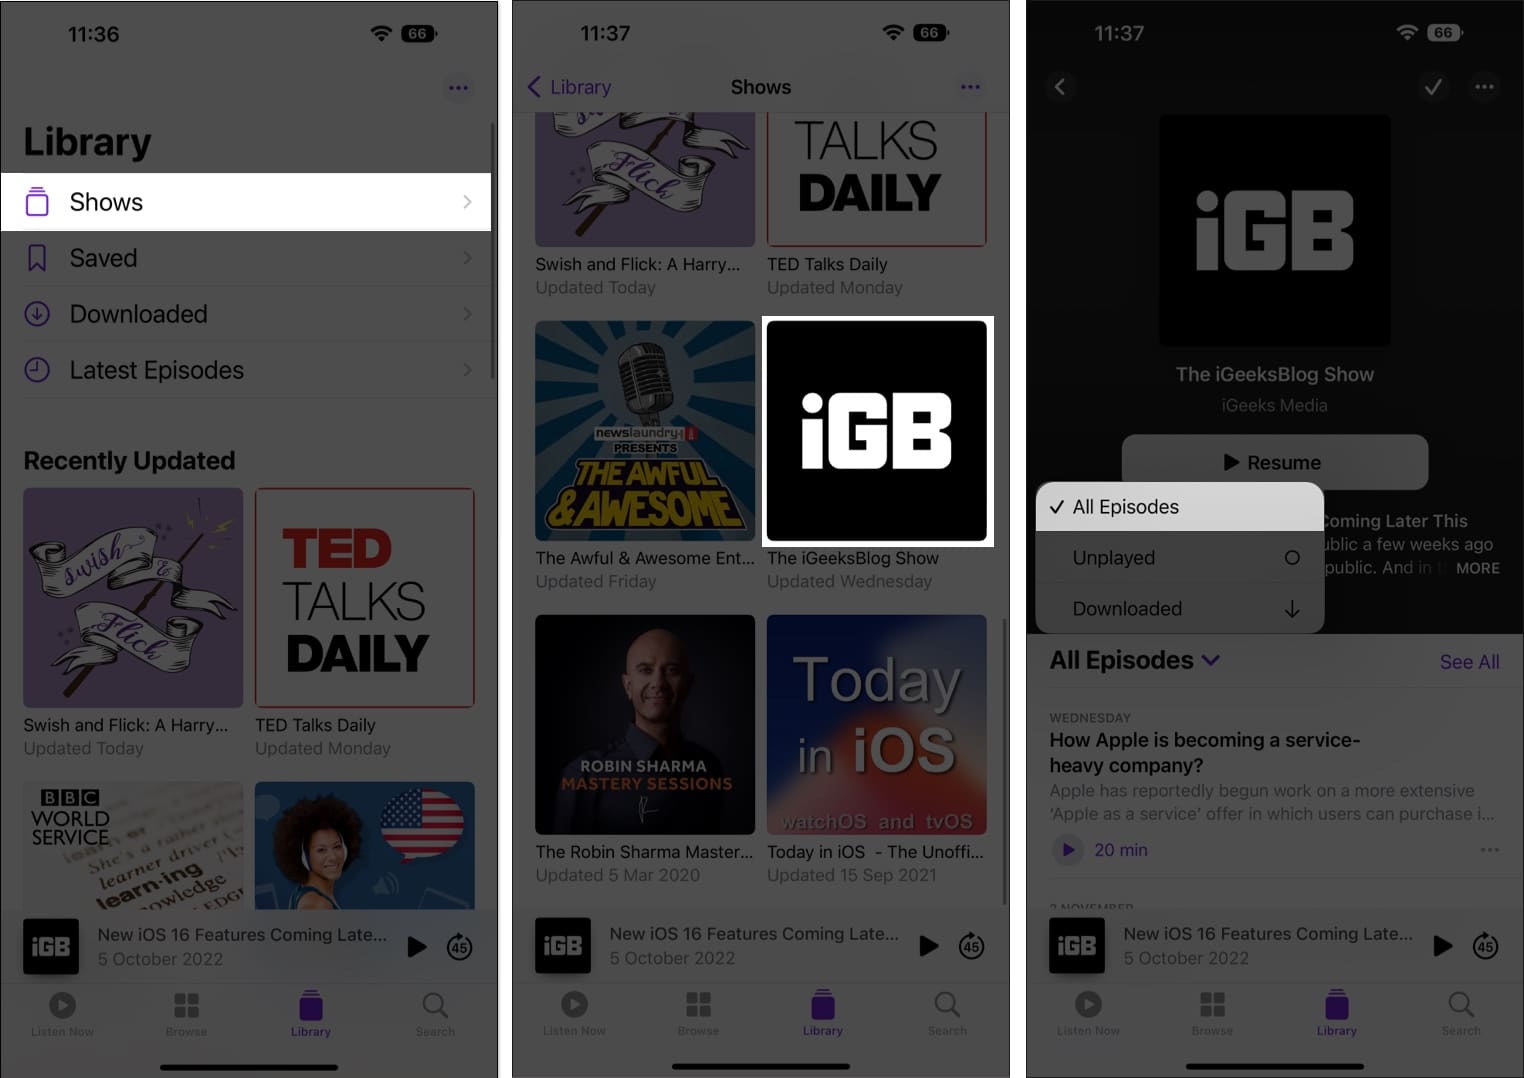 Filter seasons and episodes in Podcasts app